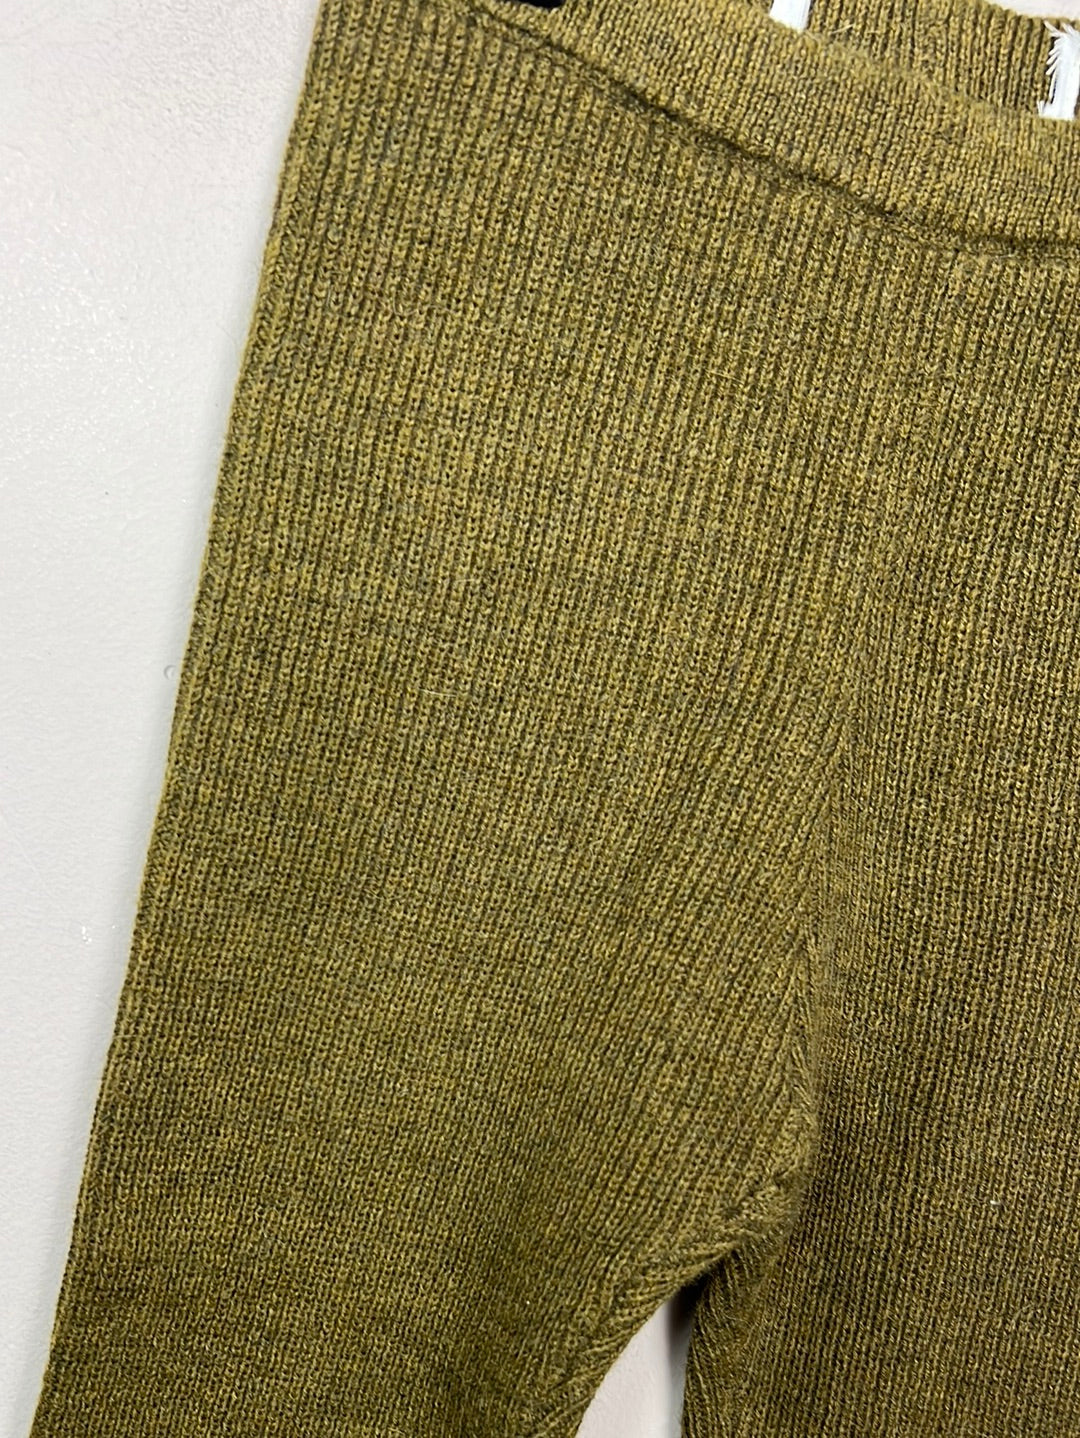 Zara Knit leggings olive 4-5y New – Sweet Pea Preloved Clothes